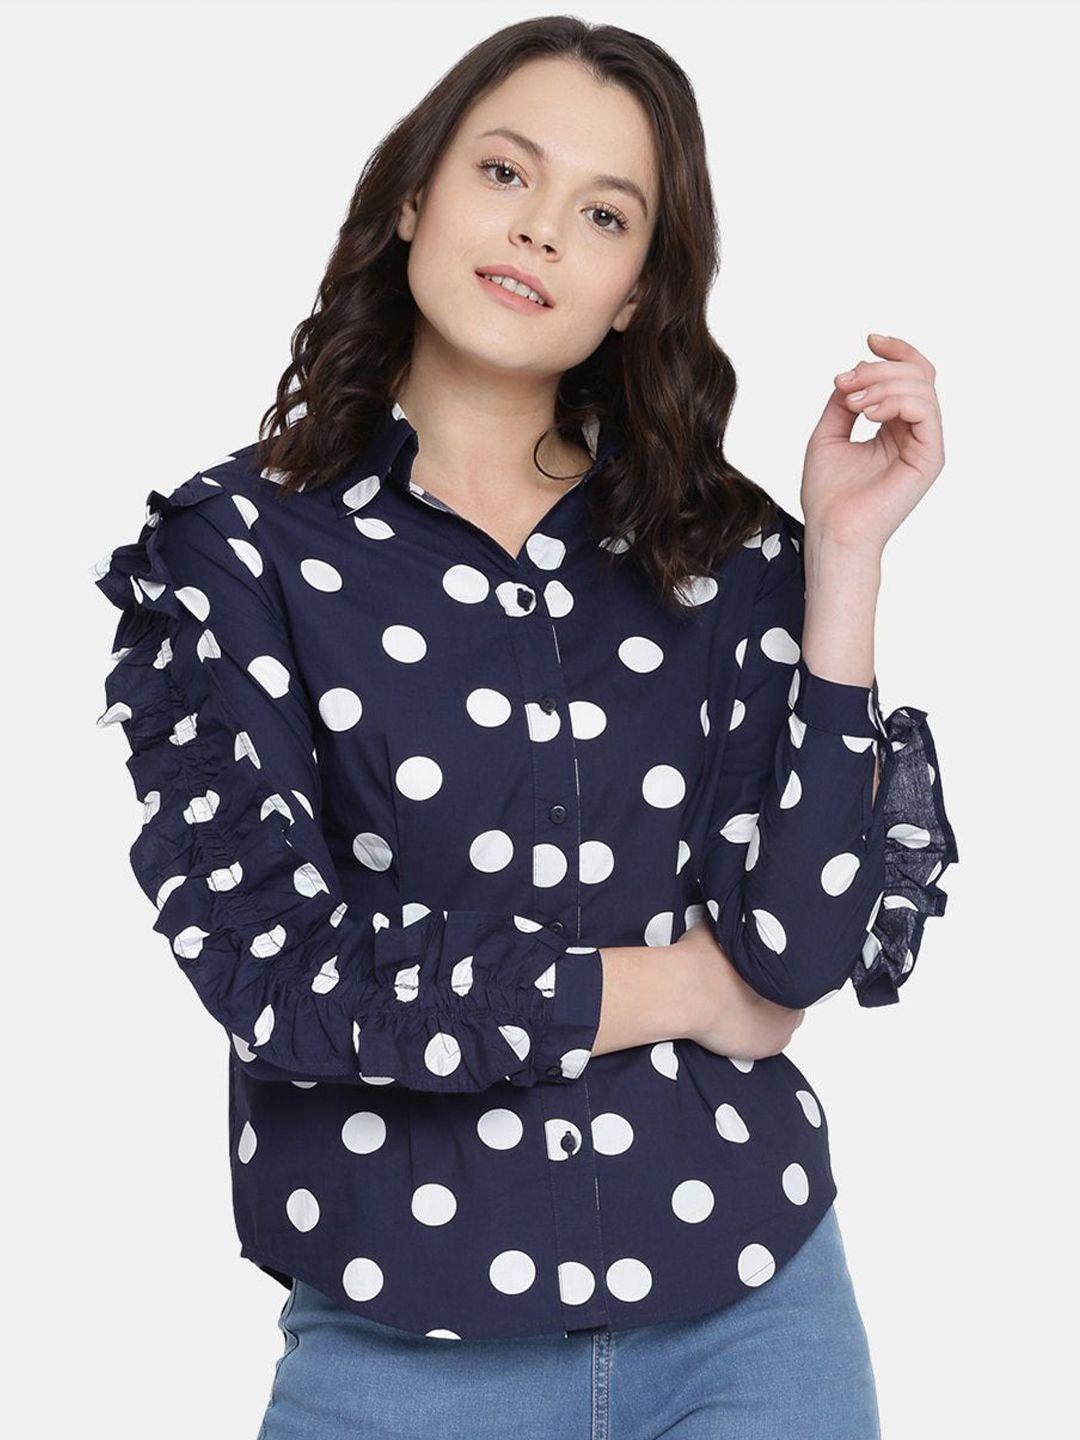 here&now women navy blue printed cotton polka dots casual shirt